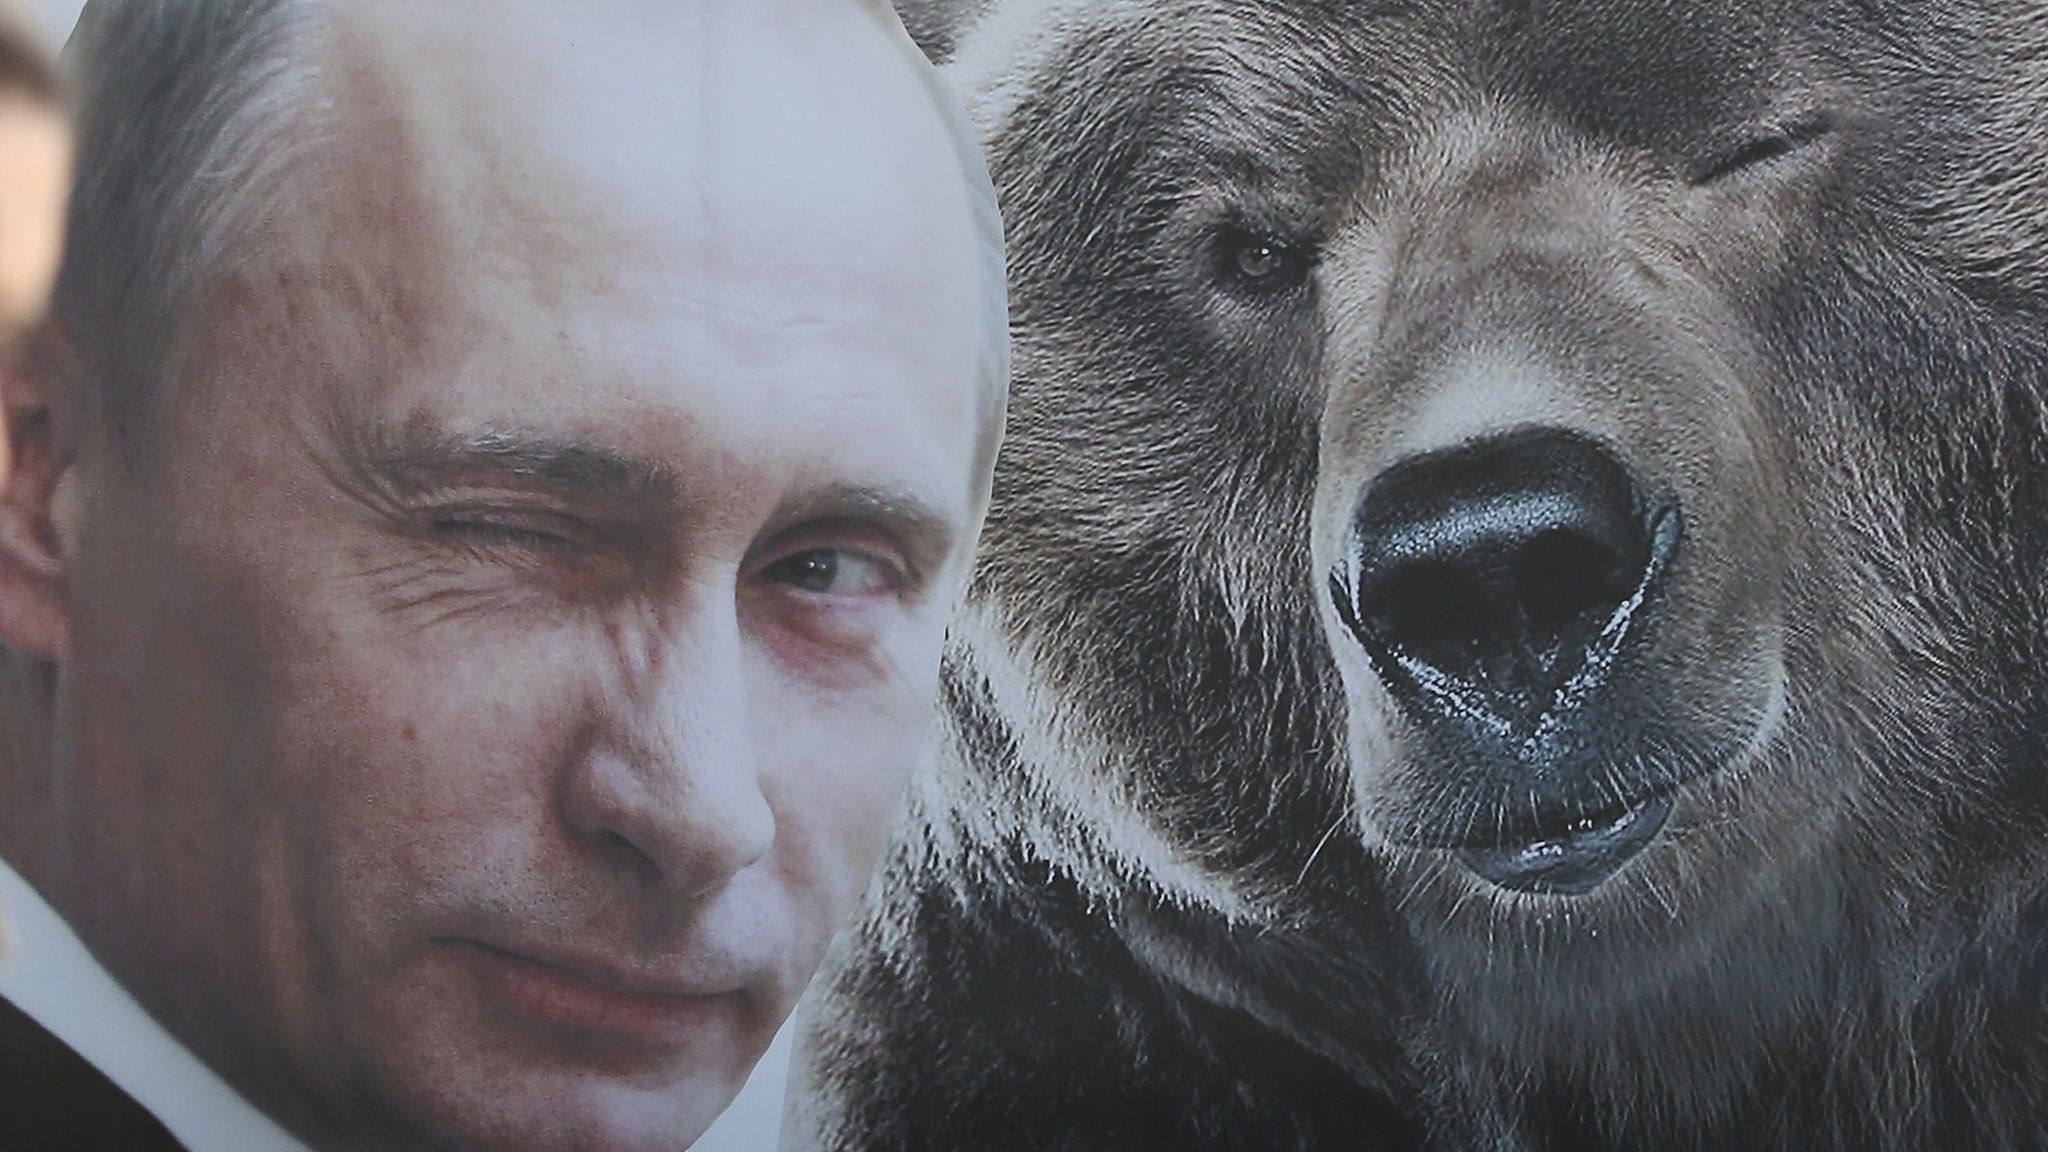 A woman walks past a portrait of a winking Russian President Vladimir Putin and a bear at Victory Park ahead of celebrations to mark the 70th anniversary of the victory over Nazi Germany and the end of World War II on May 8, 2015 in Moscow, Russia